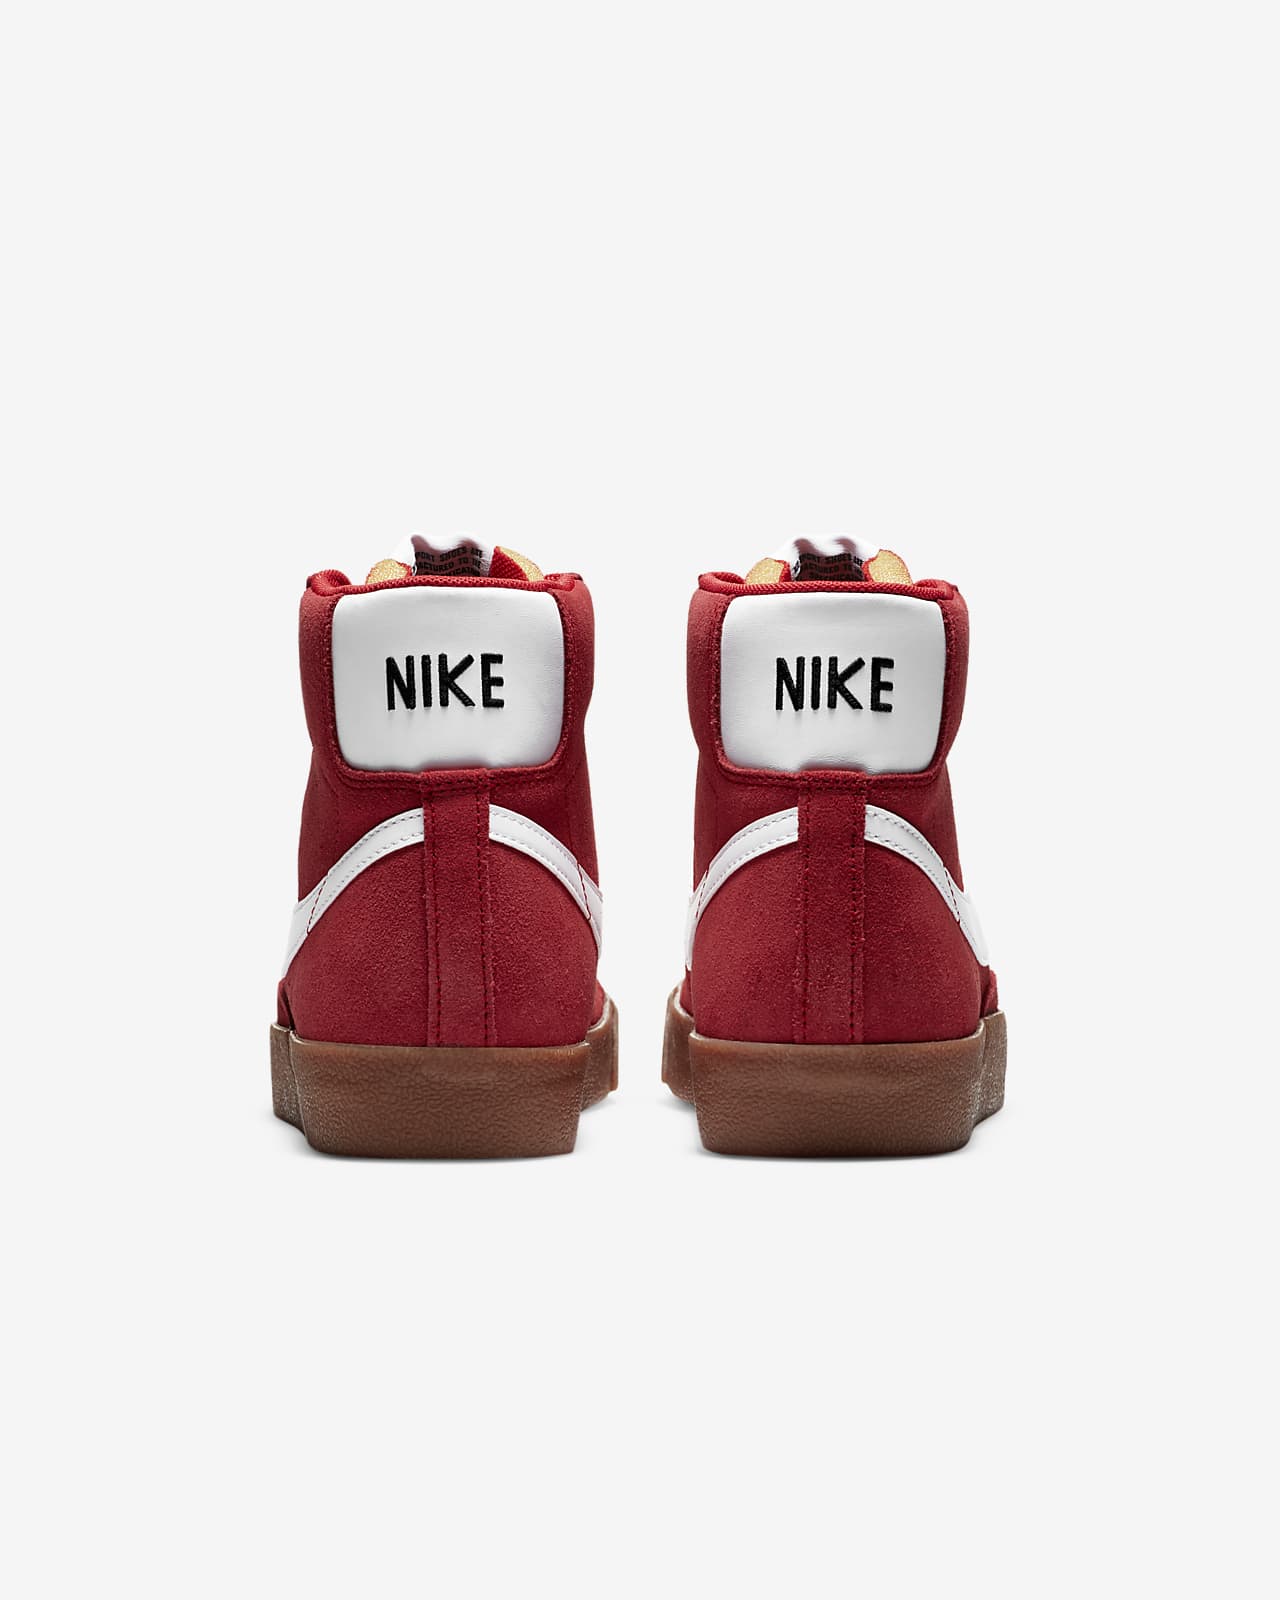 nike blazer mid 77 suede review